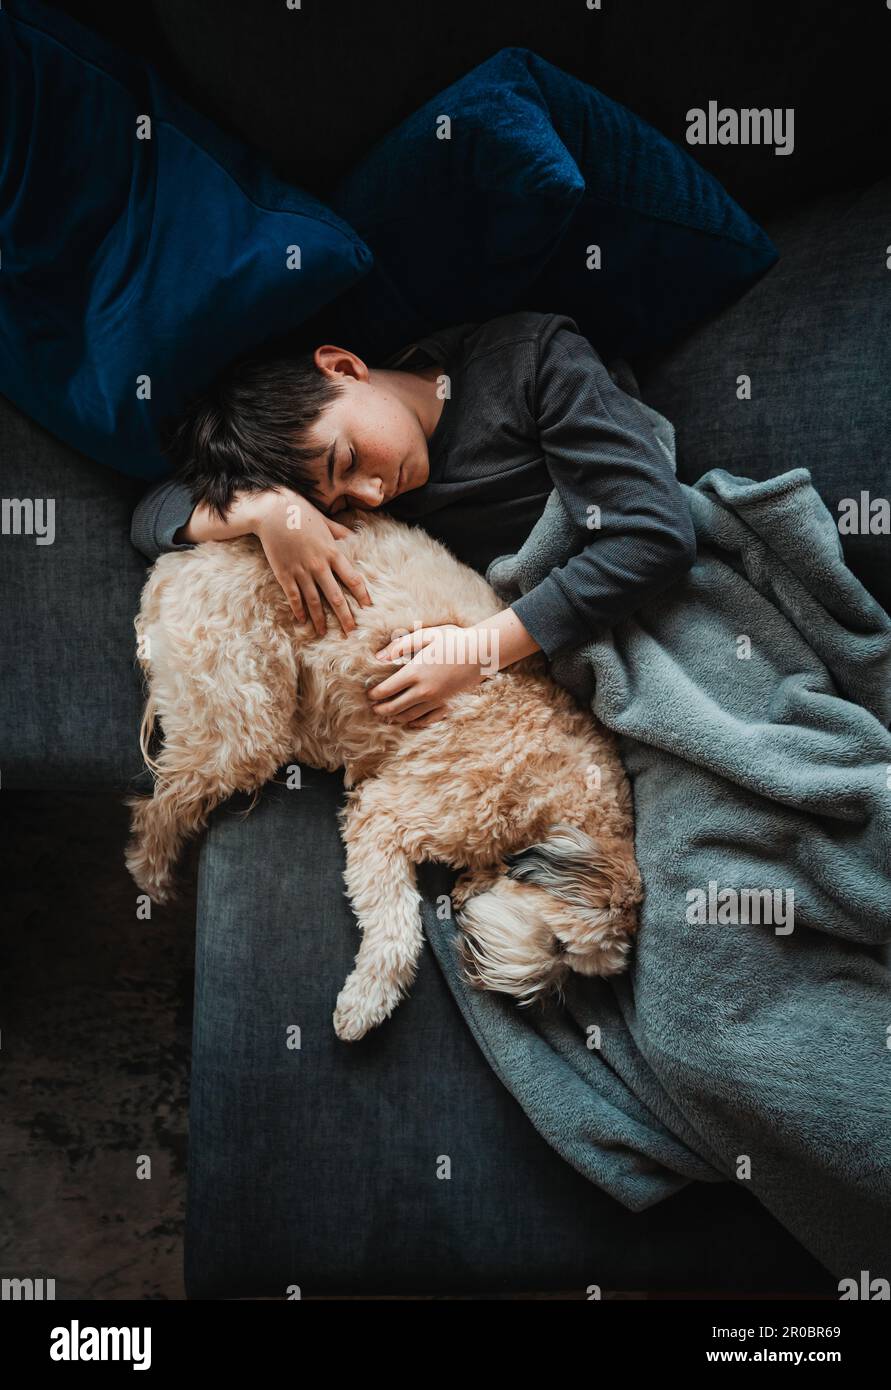 Overhead view of boy and fluffy dog sleeping on sofa together. Stock Photo